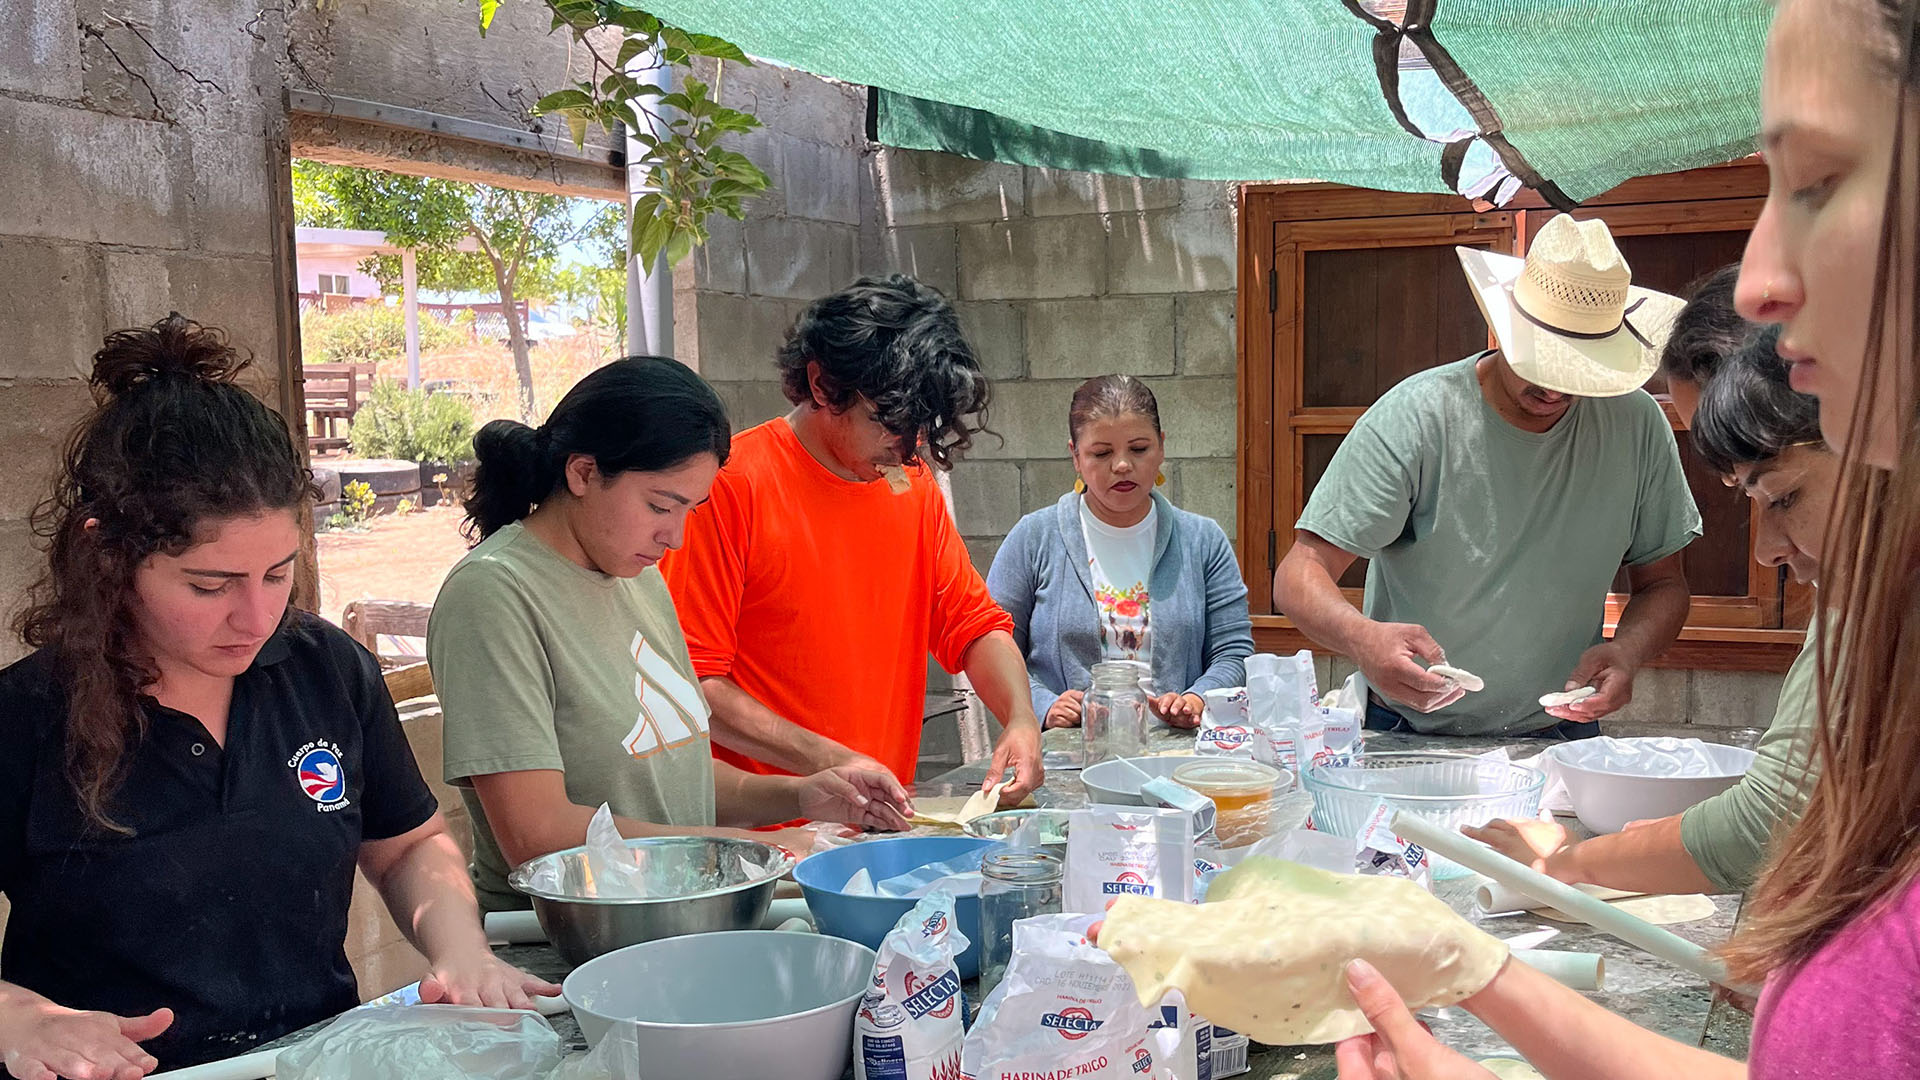 Students led by Rigo Aldama making tortillas from scratch in outdoor room.